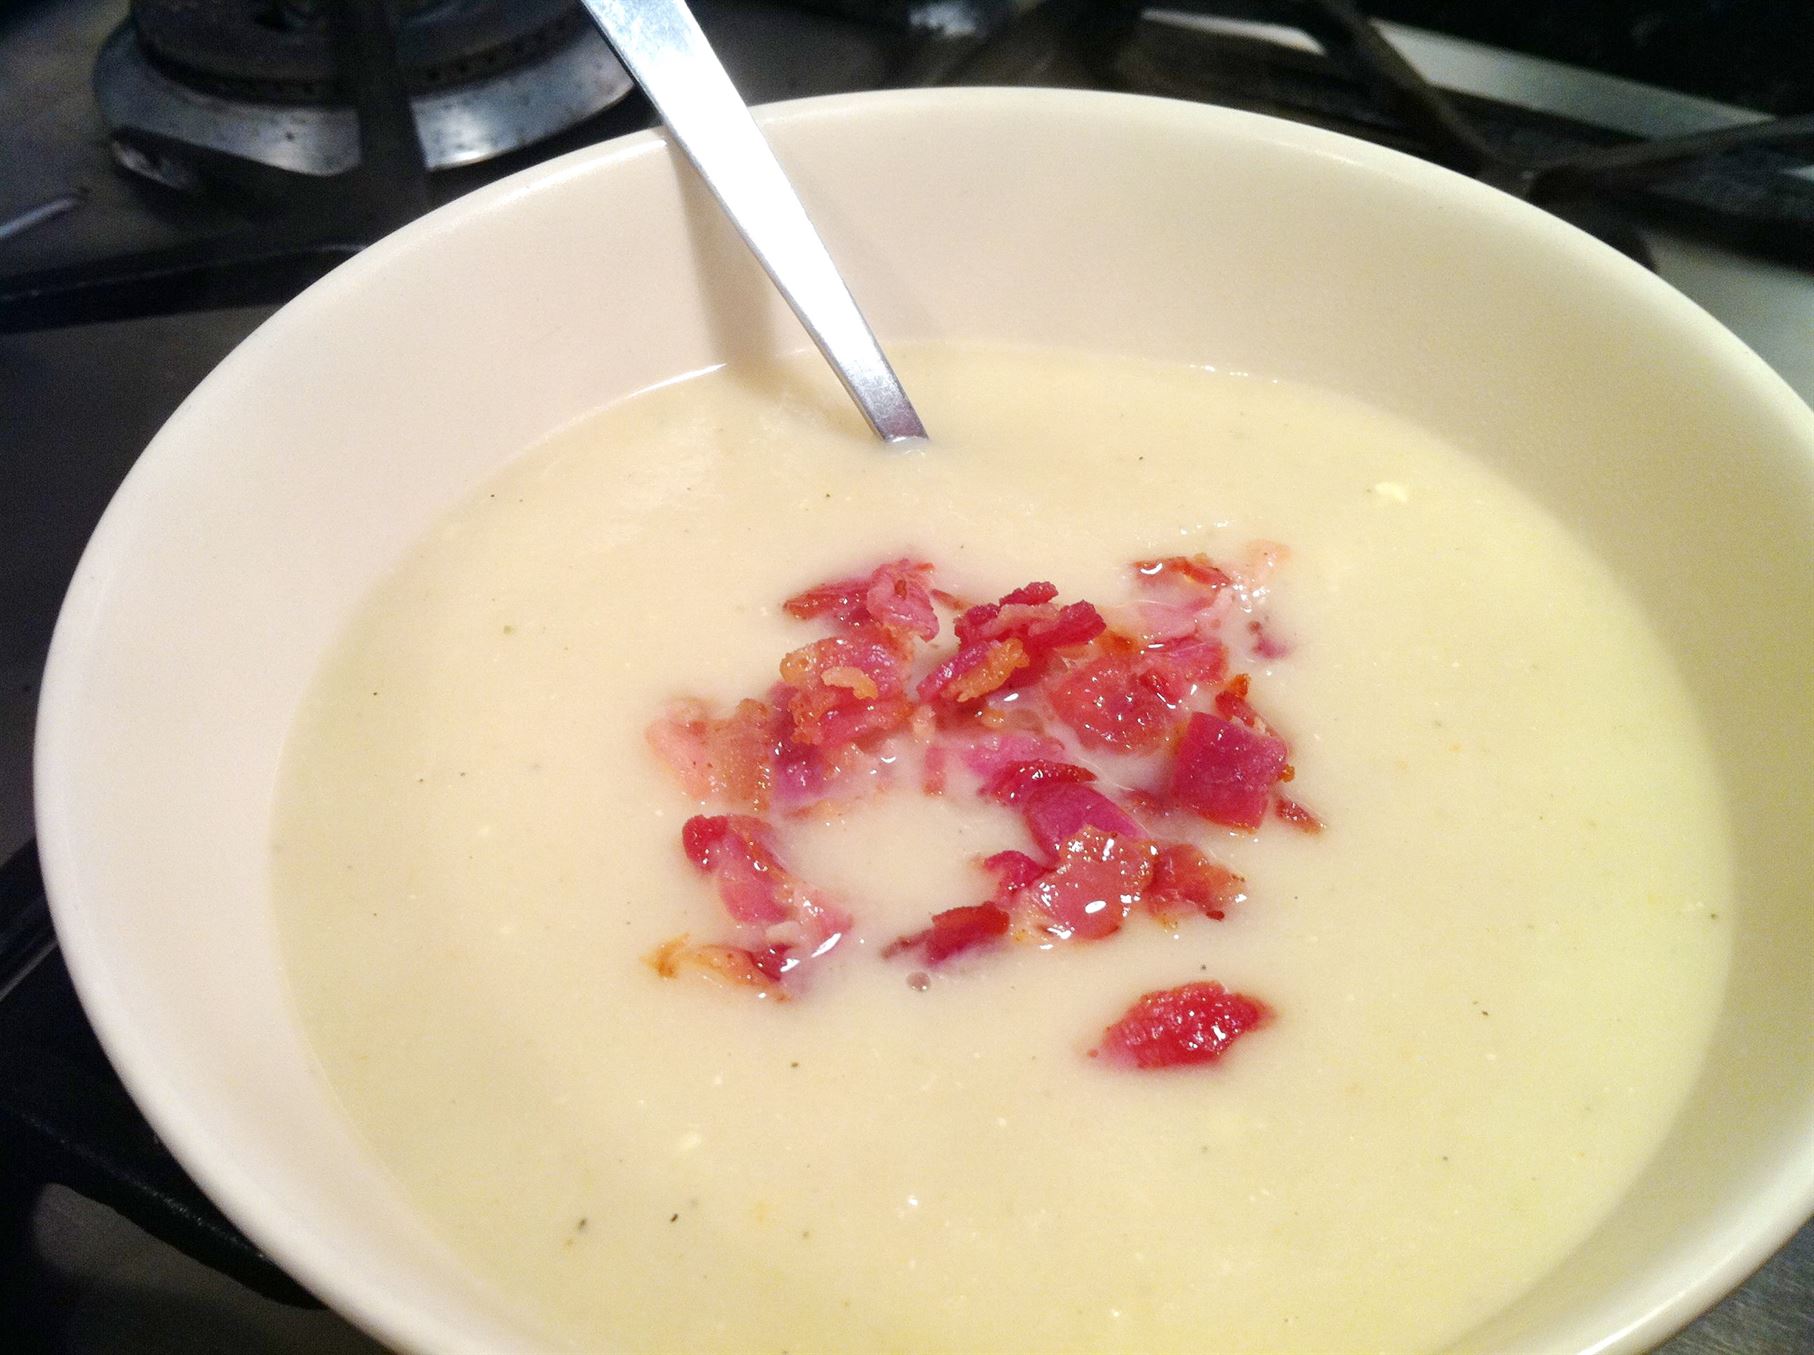 Apple and Celeriac Soup with Bacon Bits and a Smoky Twist, Lay The Table